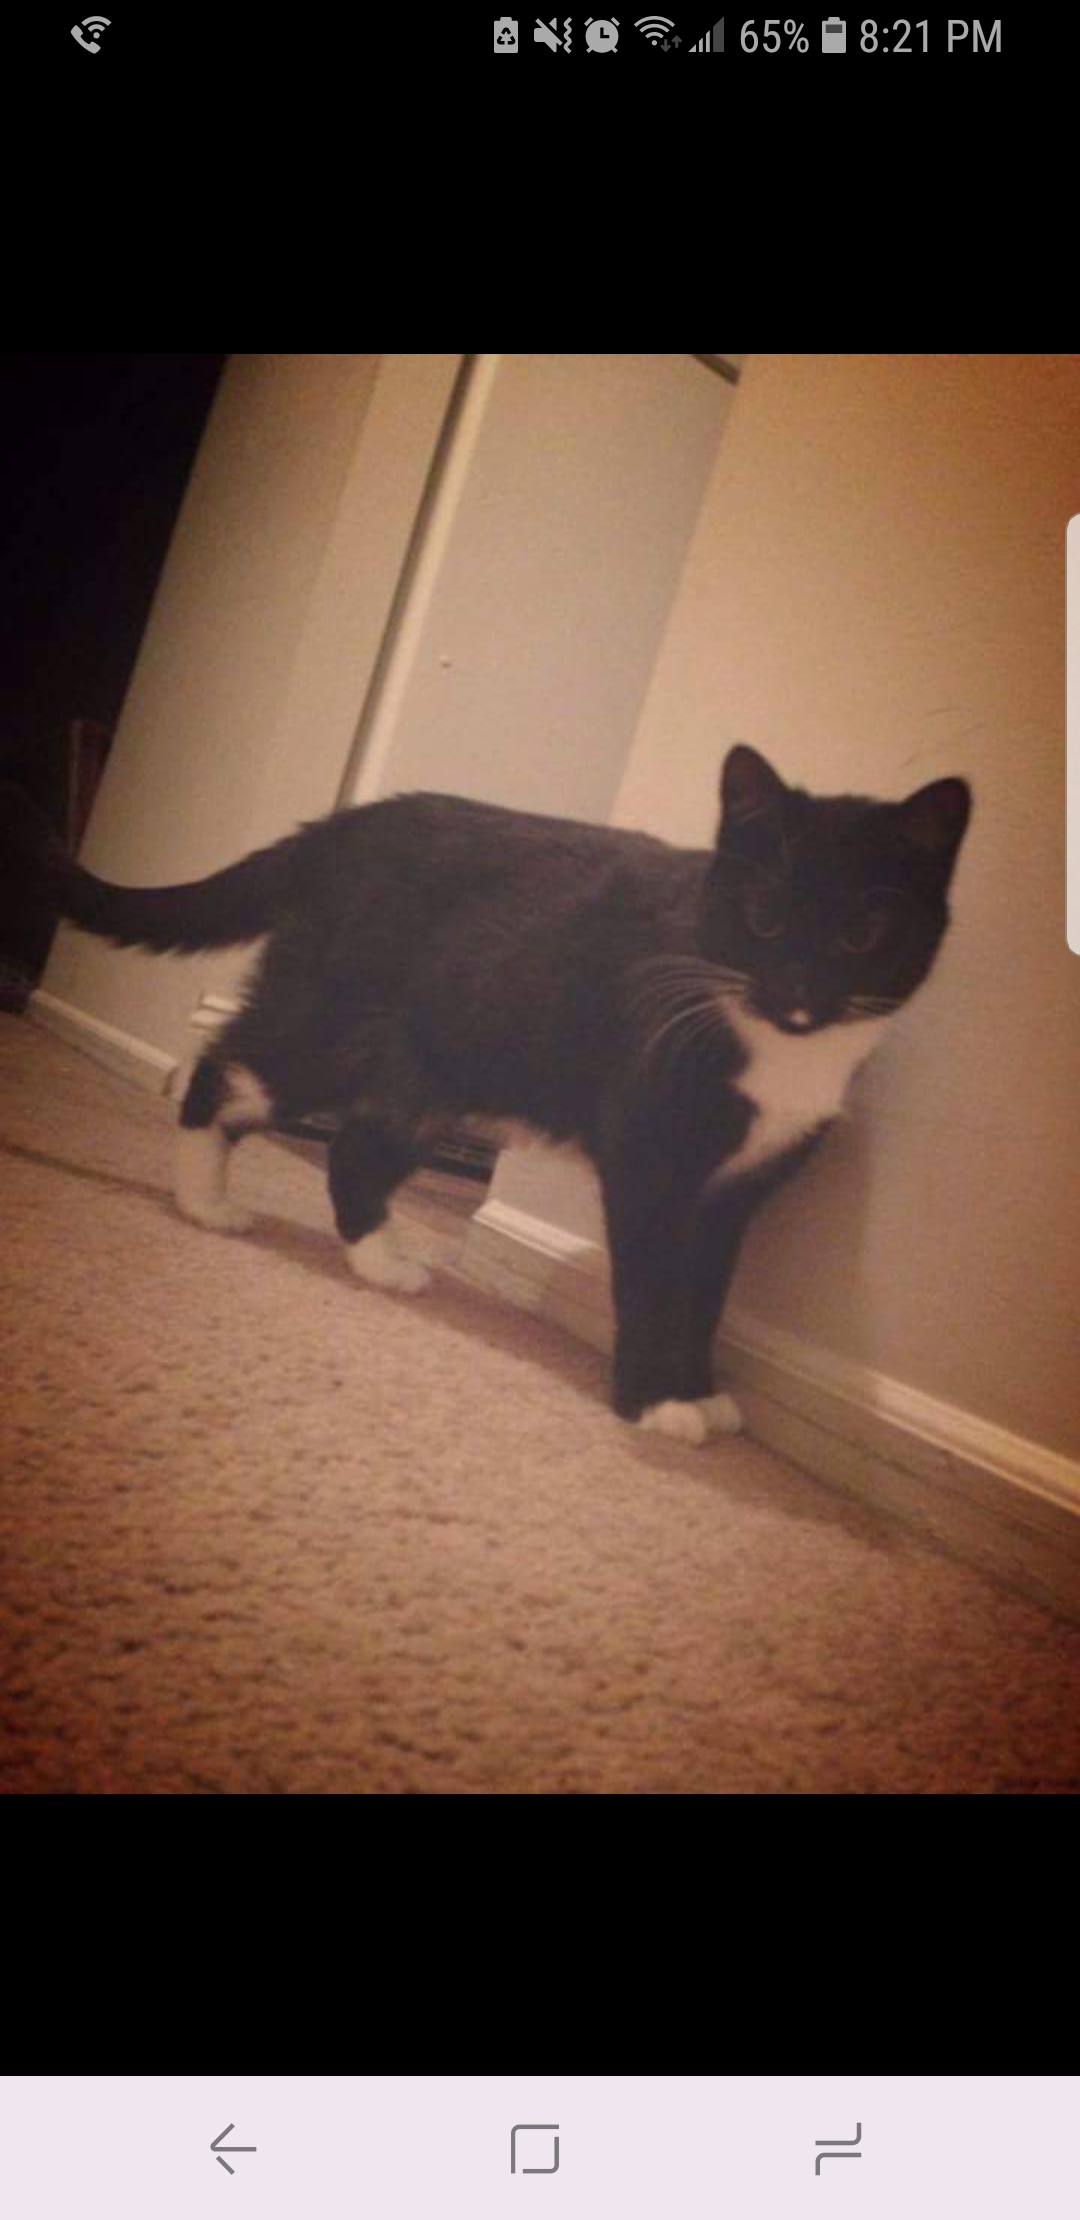 Image of Mittens, Lost Cat